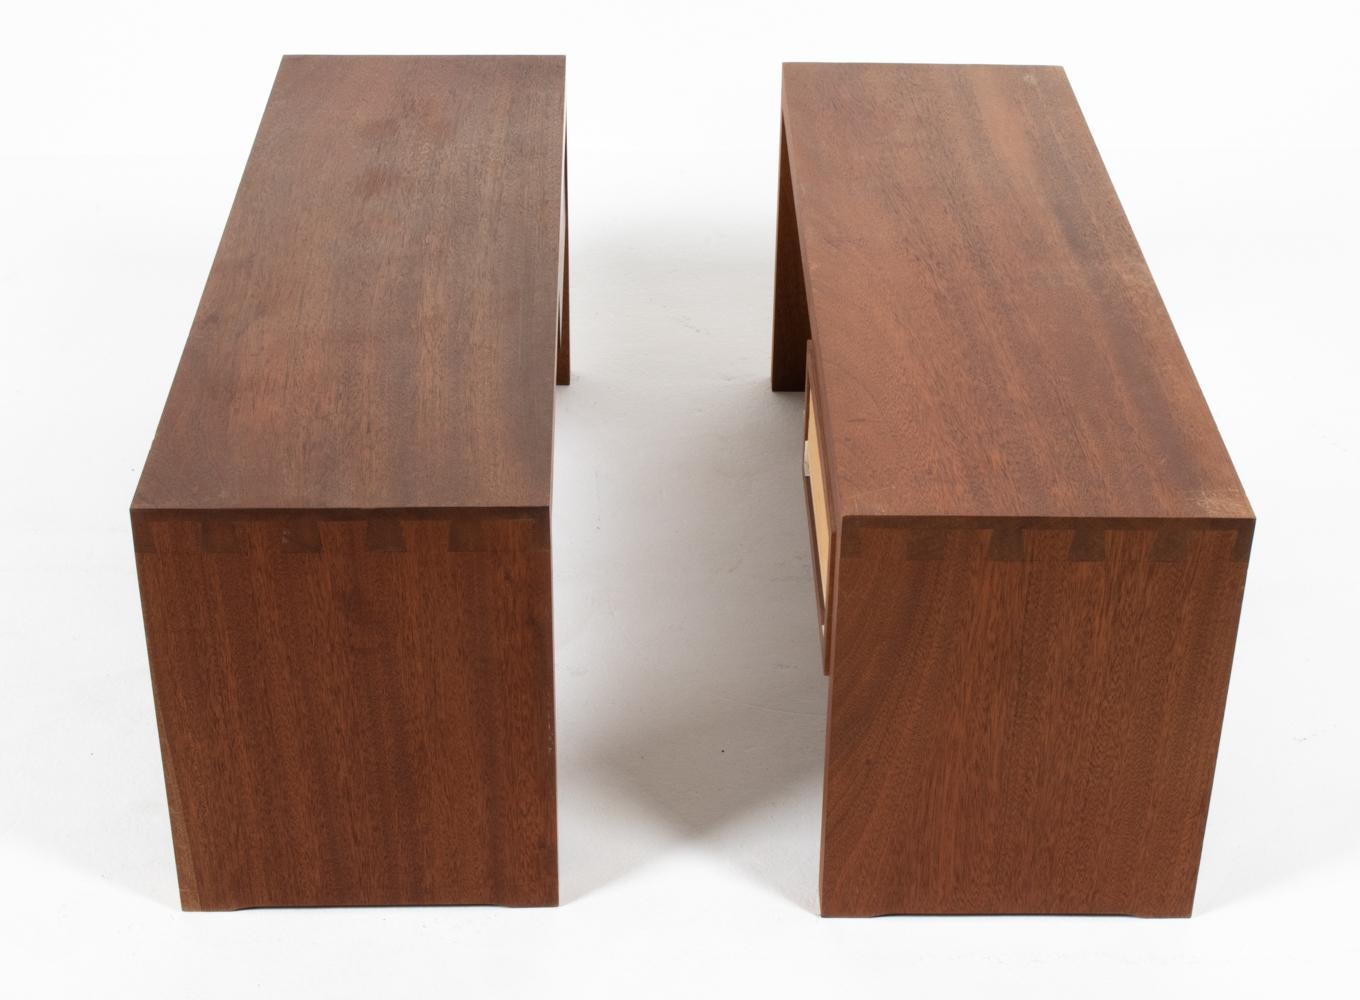 Pair of Mid-Century Modern Dovetailed Teak Nightstands or Benches For Sale 10